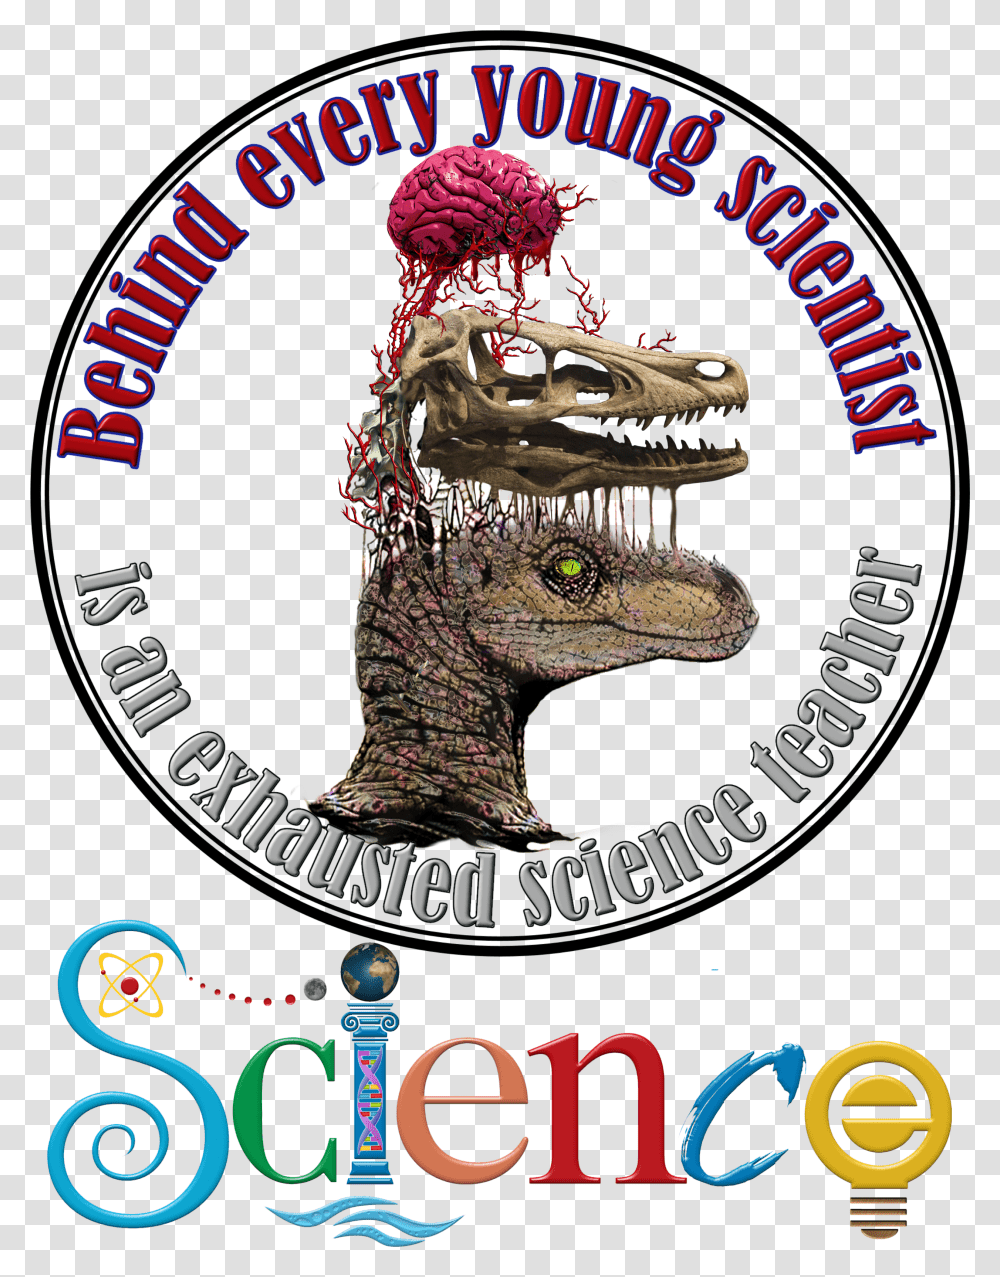 Every Young Scientist Dino Michigan Science Center Transparent Png